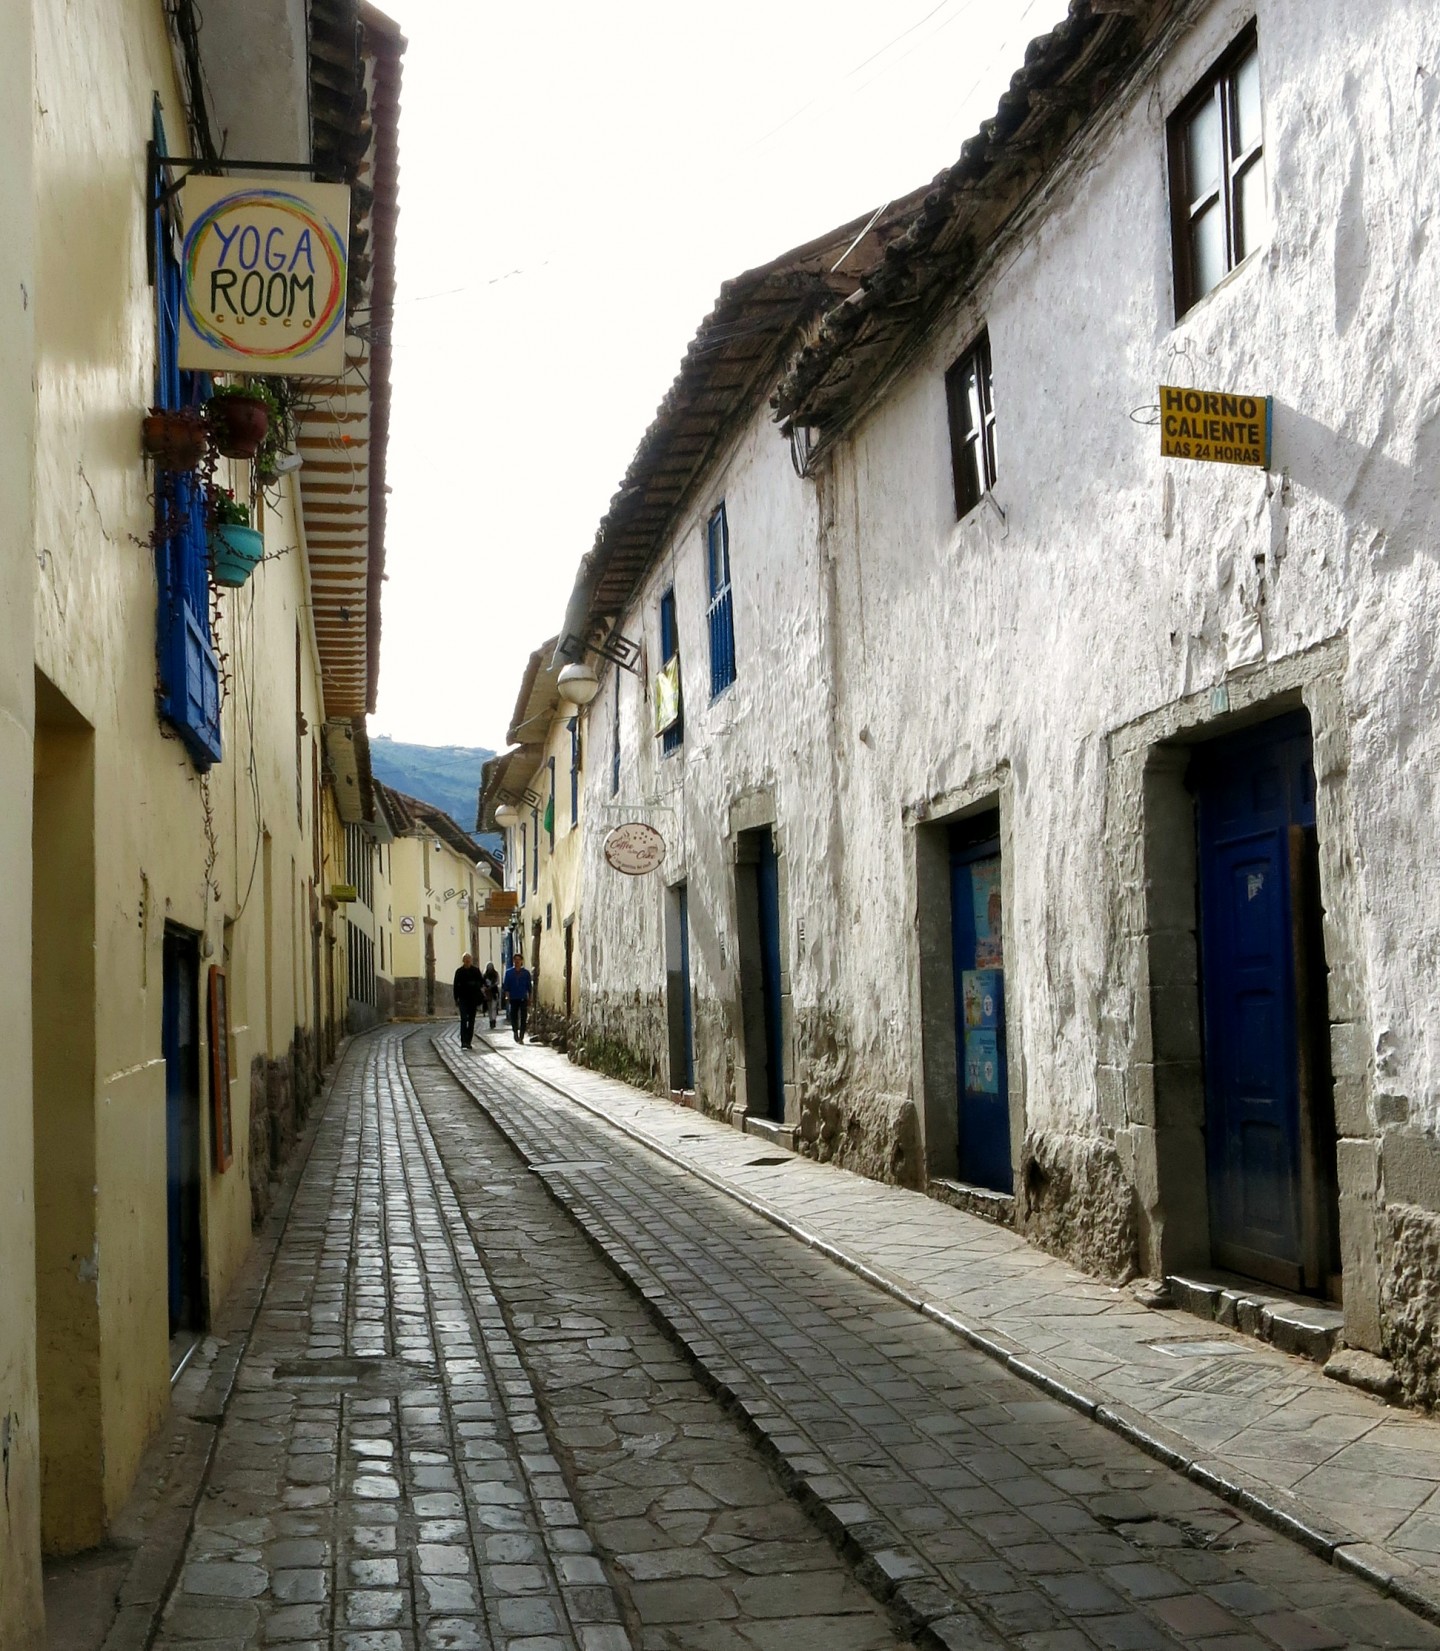 San Blas in Cusco, Peru, is a great area to find accommodation in. There are lots of cafes and shops.